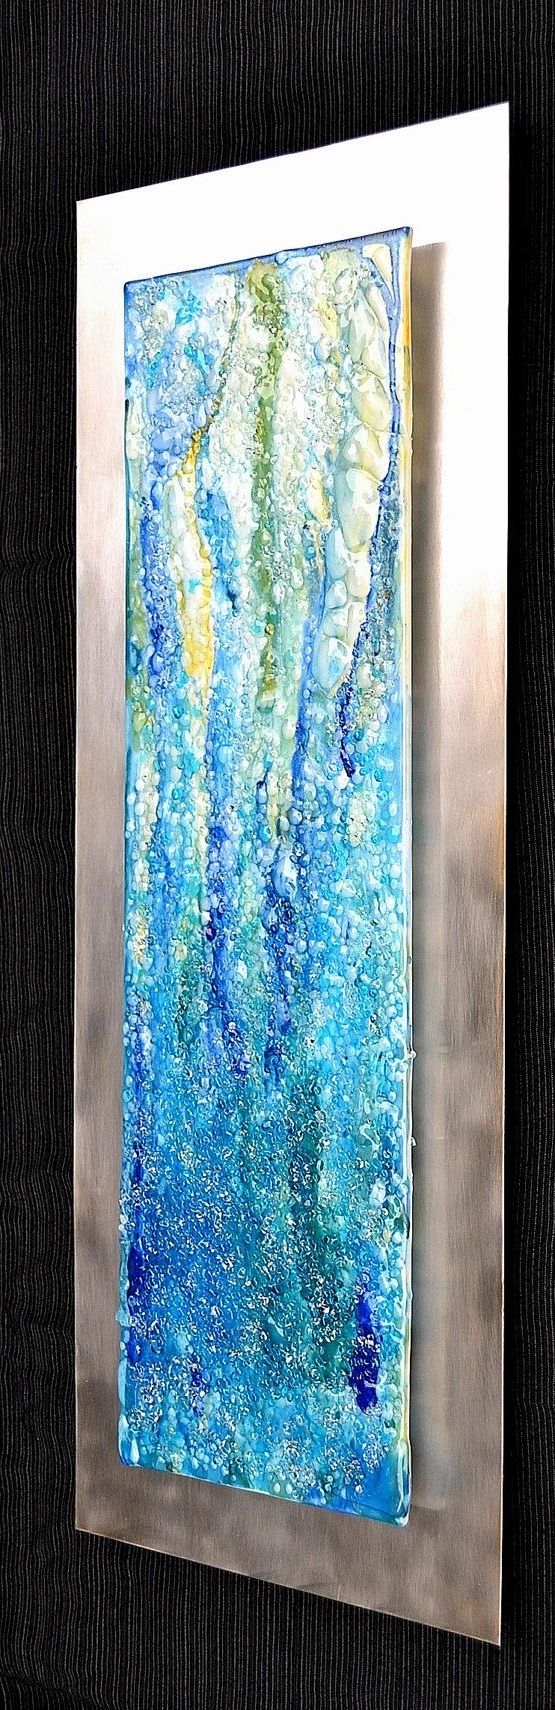 Fashionable Fused Glass Wall Art Within Waterfall – Modern Fused Glass Wall Hanging Art On Stainless Steel (View 2 of 15)